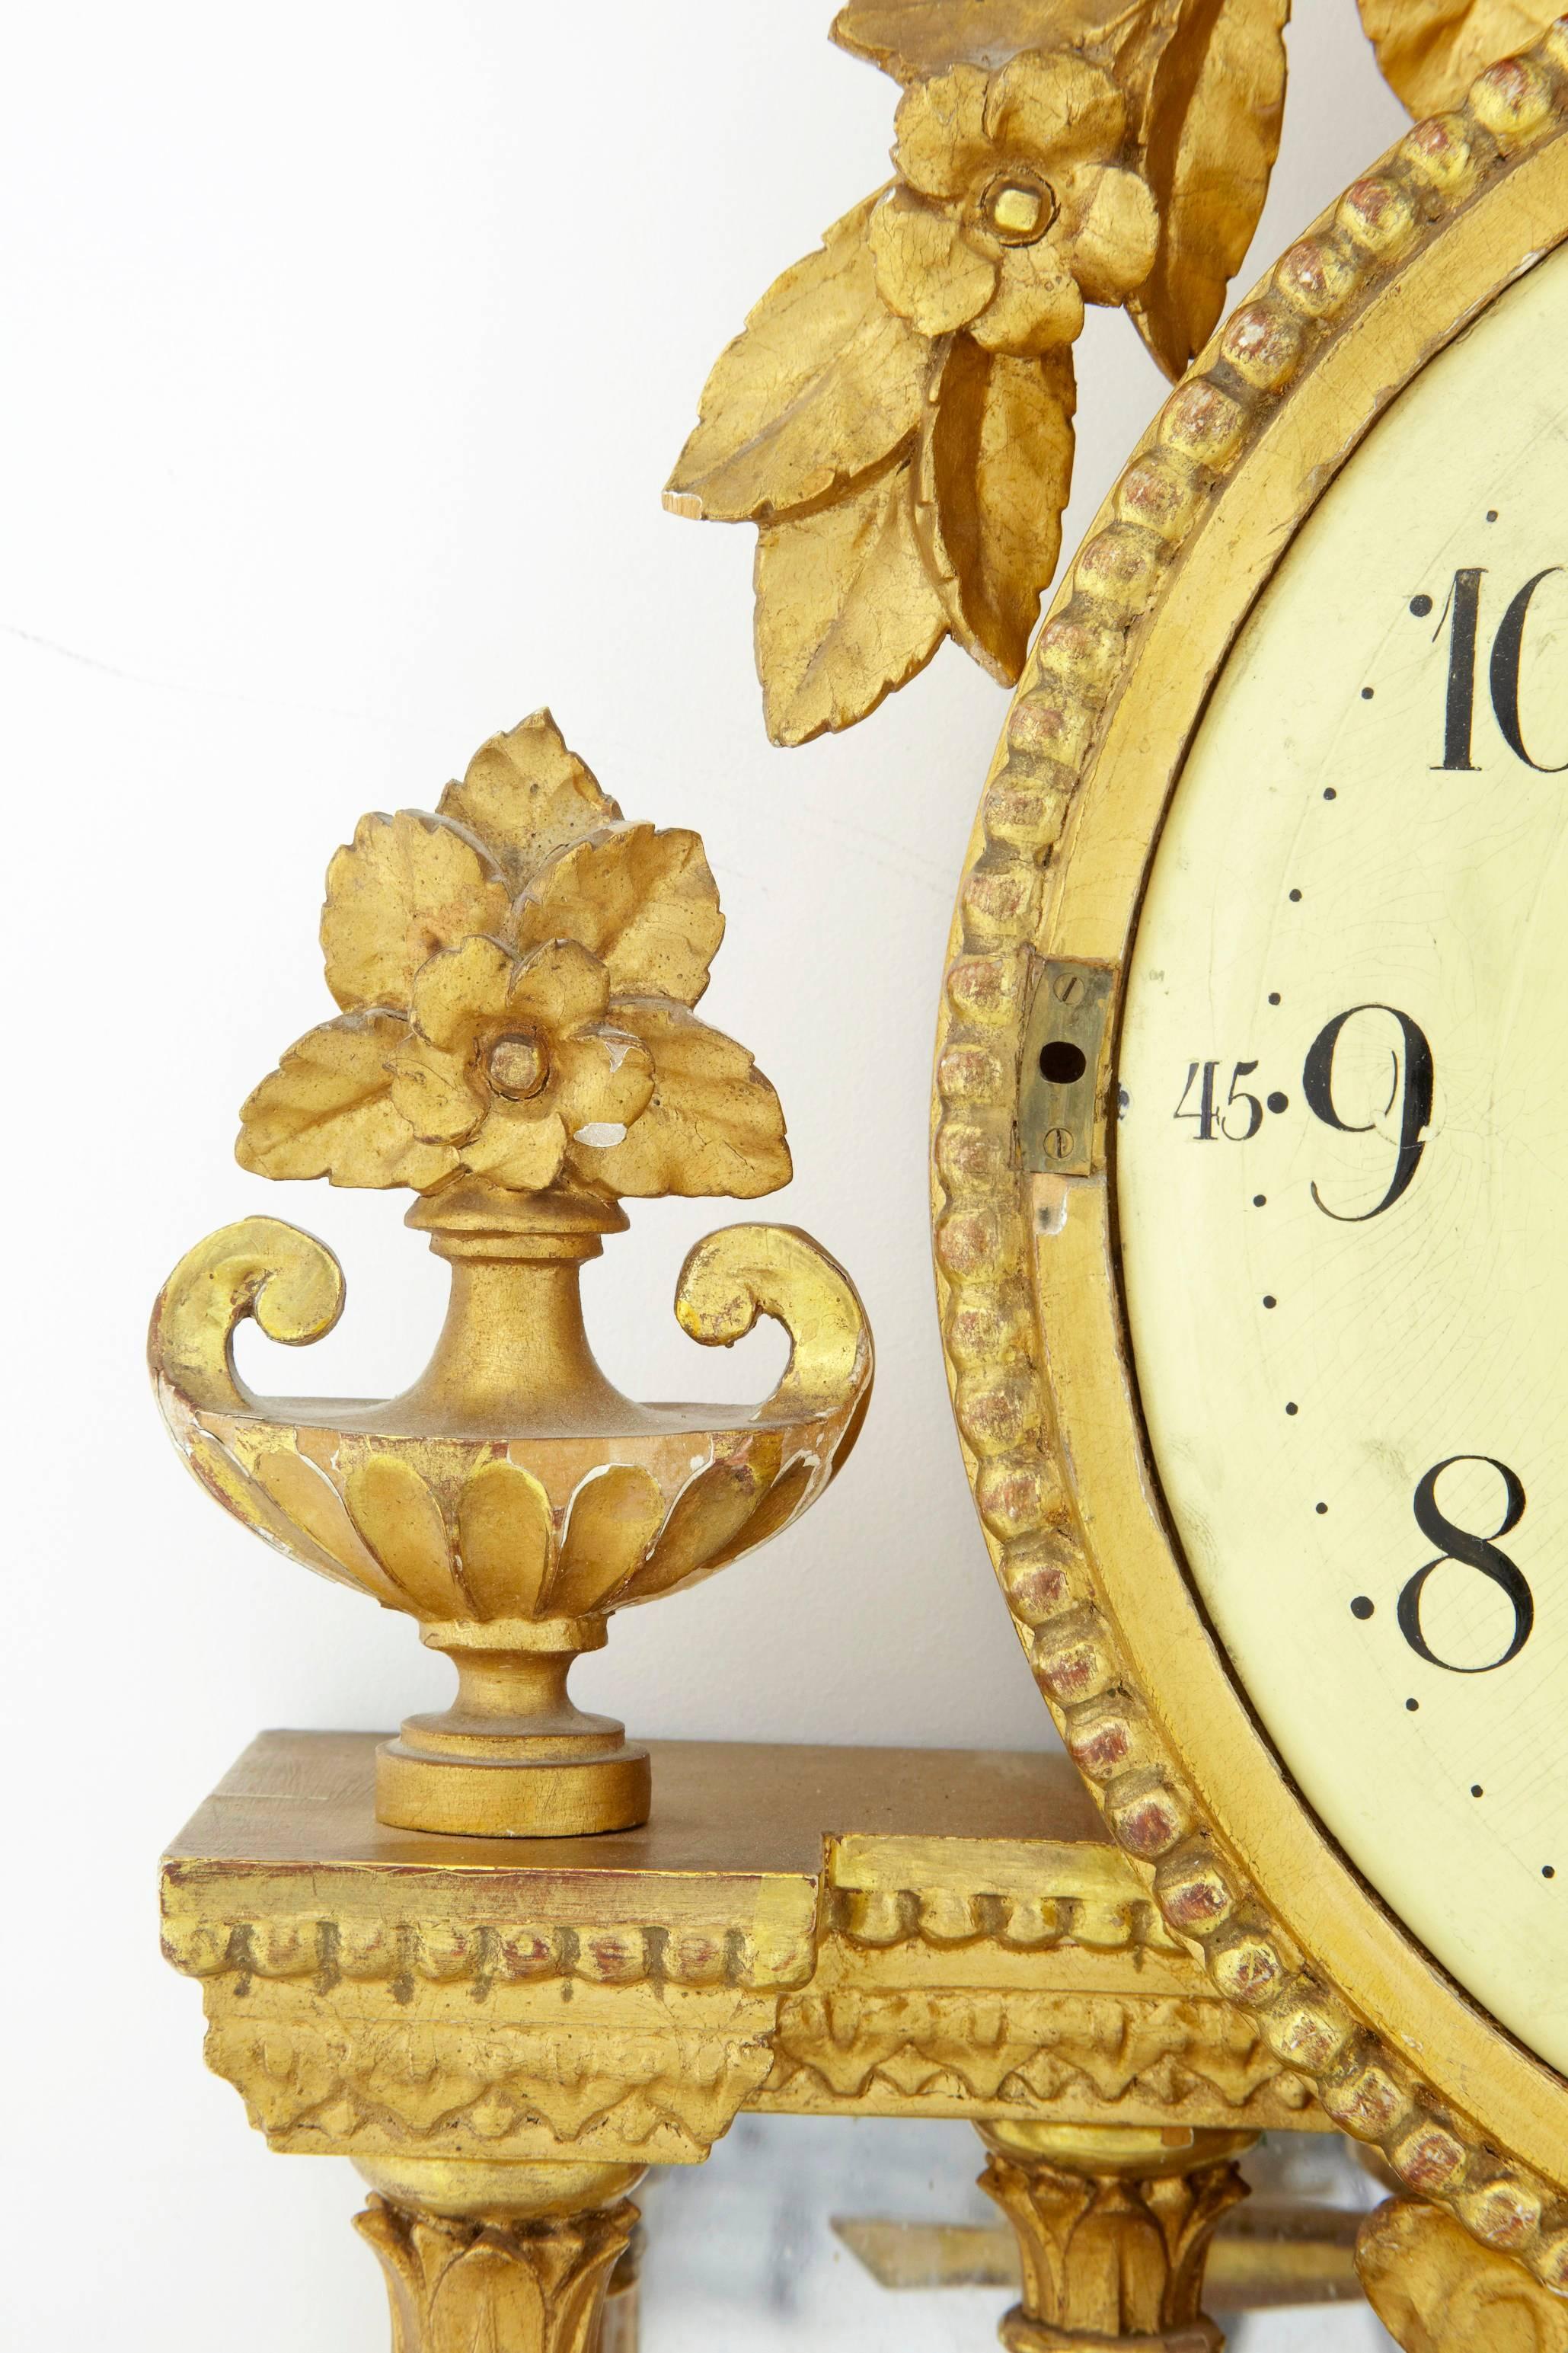 Empire Late 19th Century Swedish Gilt Wall Clock by Rob Engstrom, Stockholm